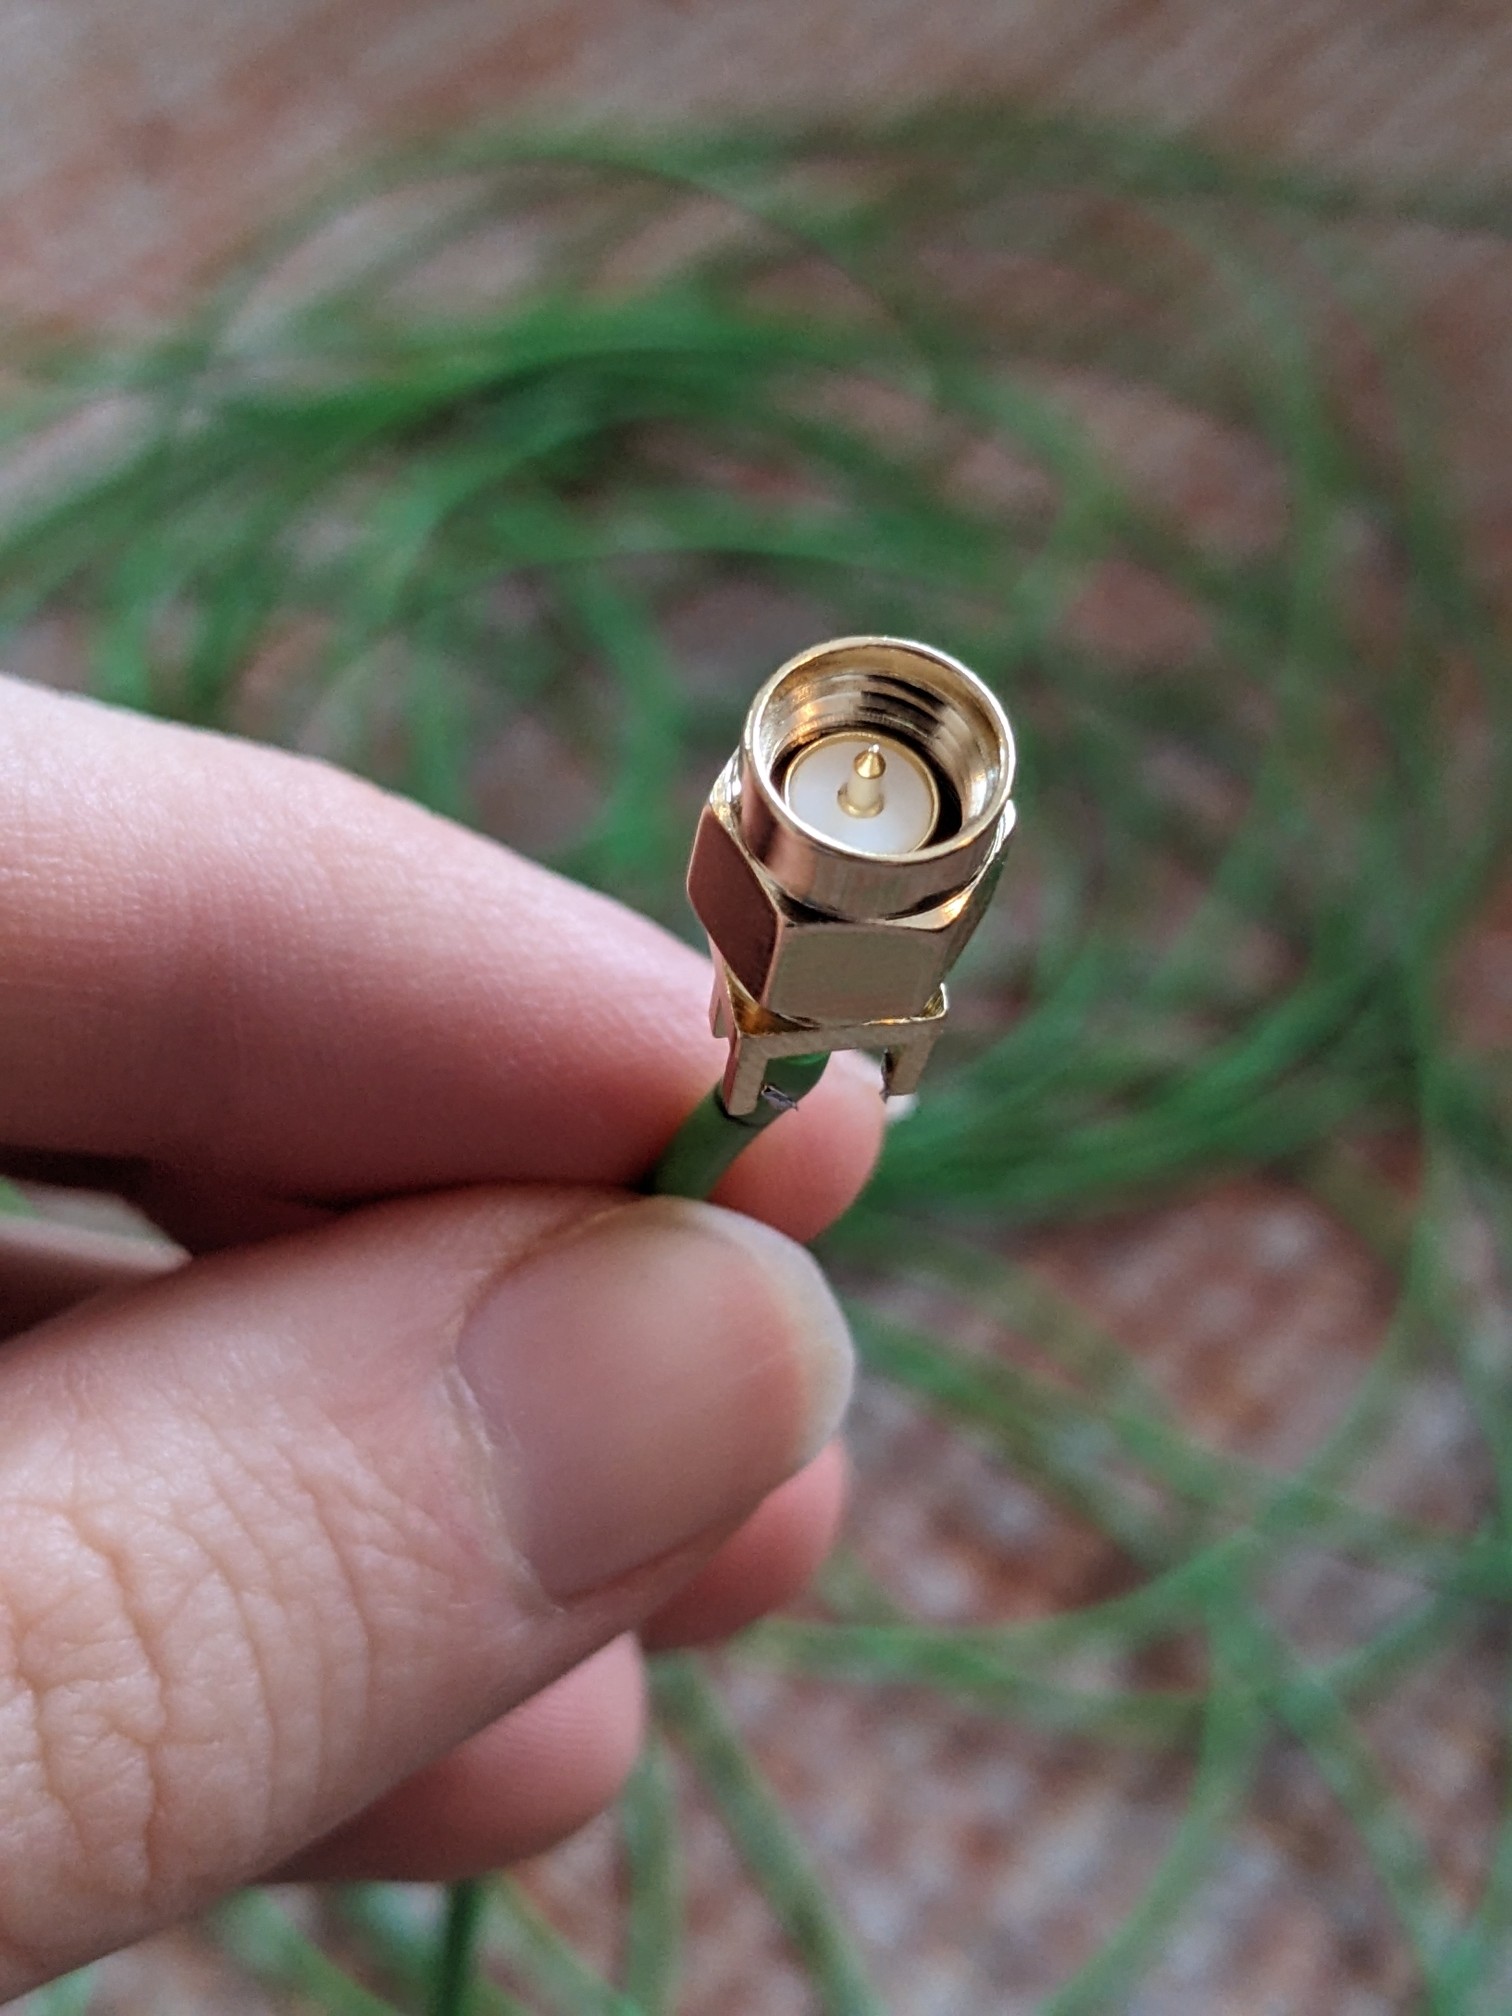 A golden screwable connector on the end of the wire.